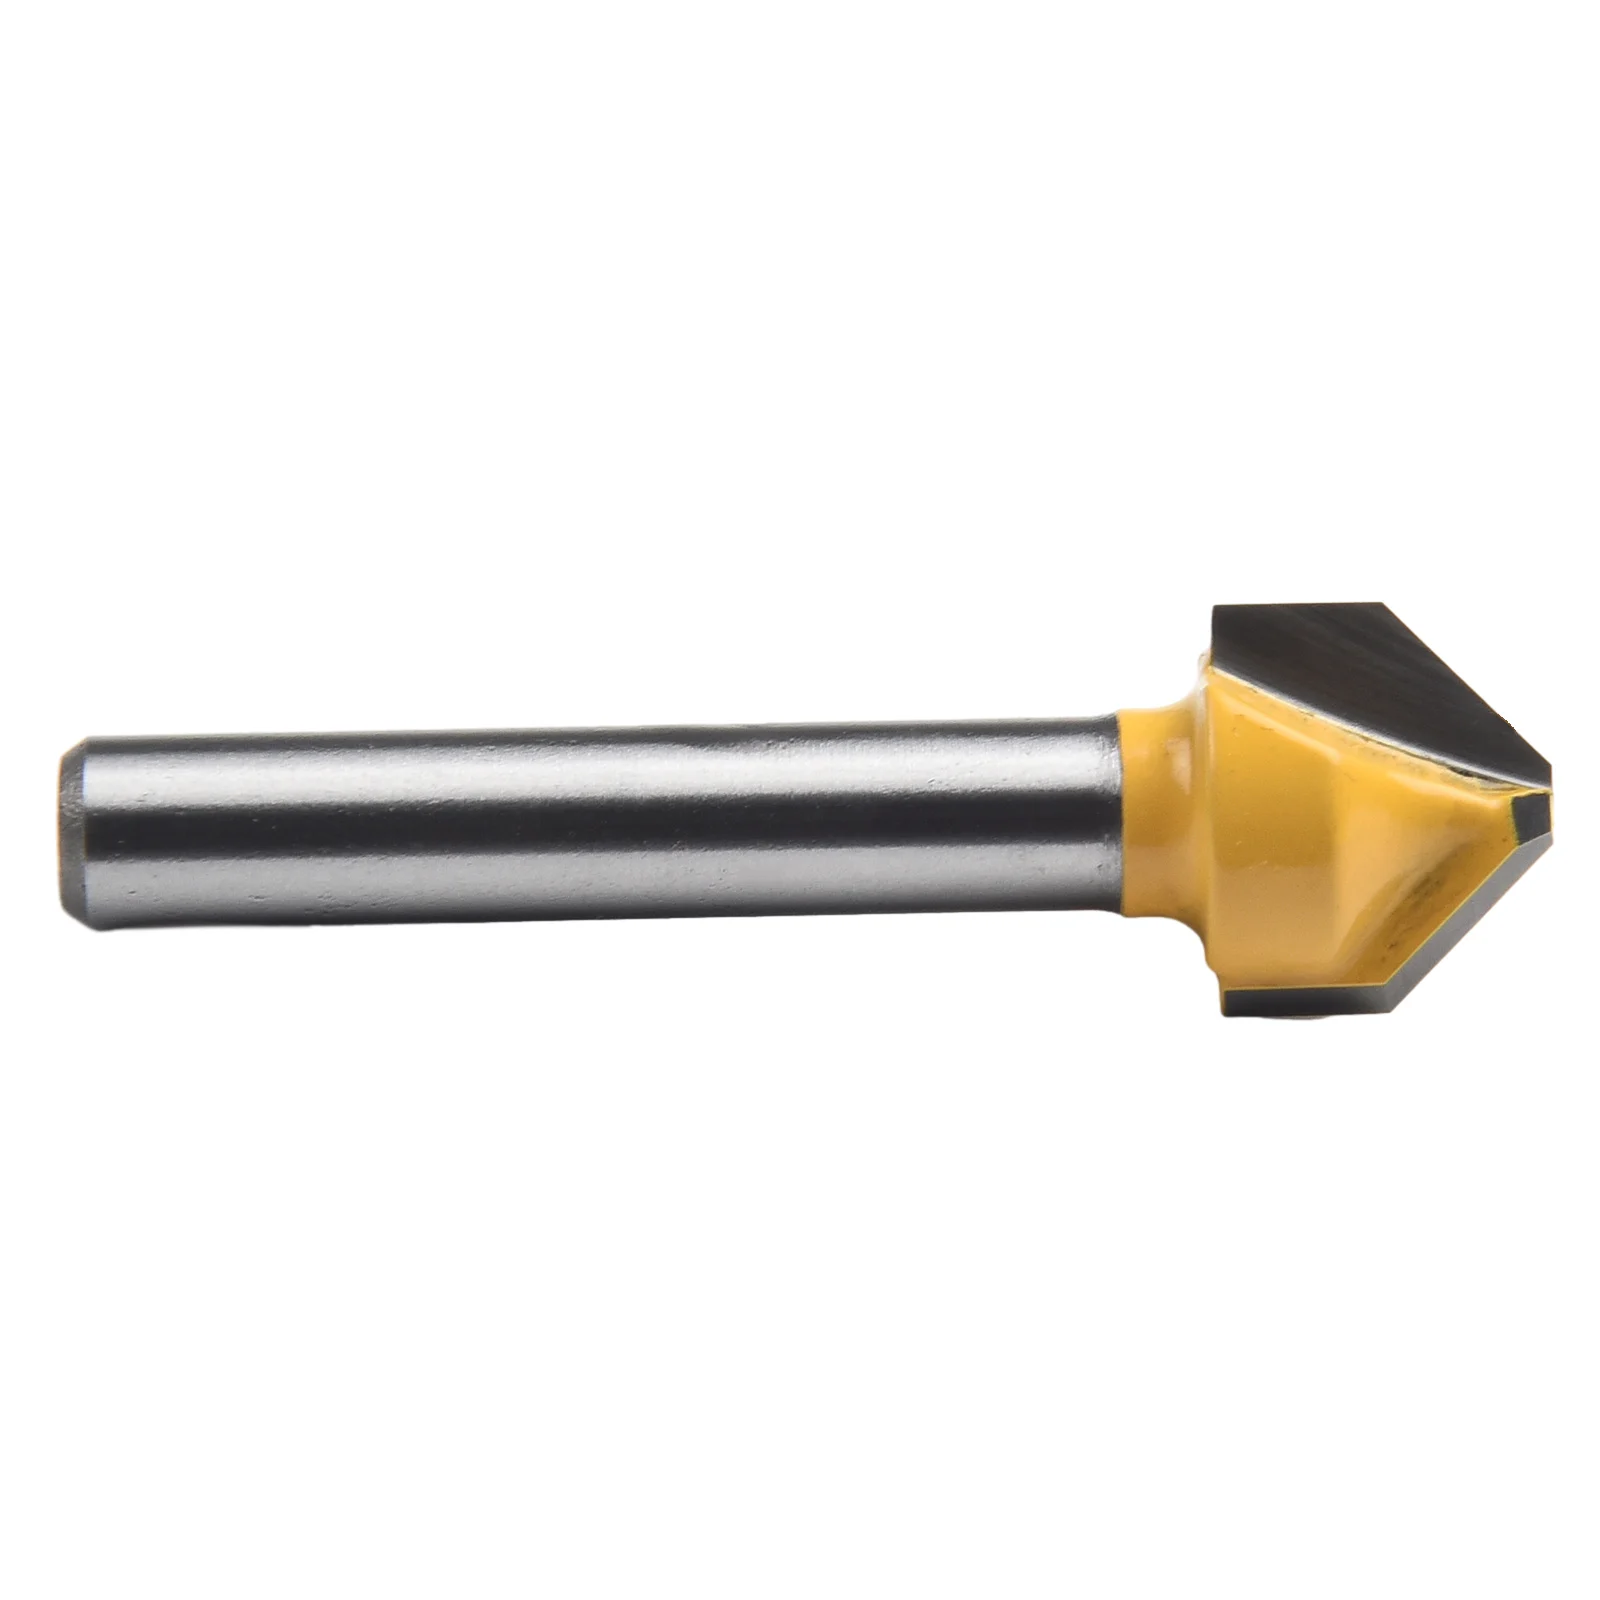 

Drilling Accessory Chamfer Flat Head Cutter For Acrylic MDF PVC Carbide Engraving Milling Cutter V-shaped 6mm Shank